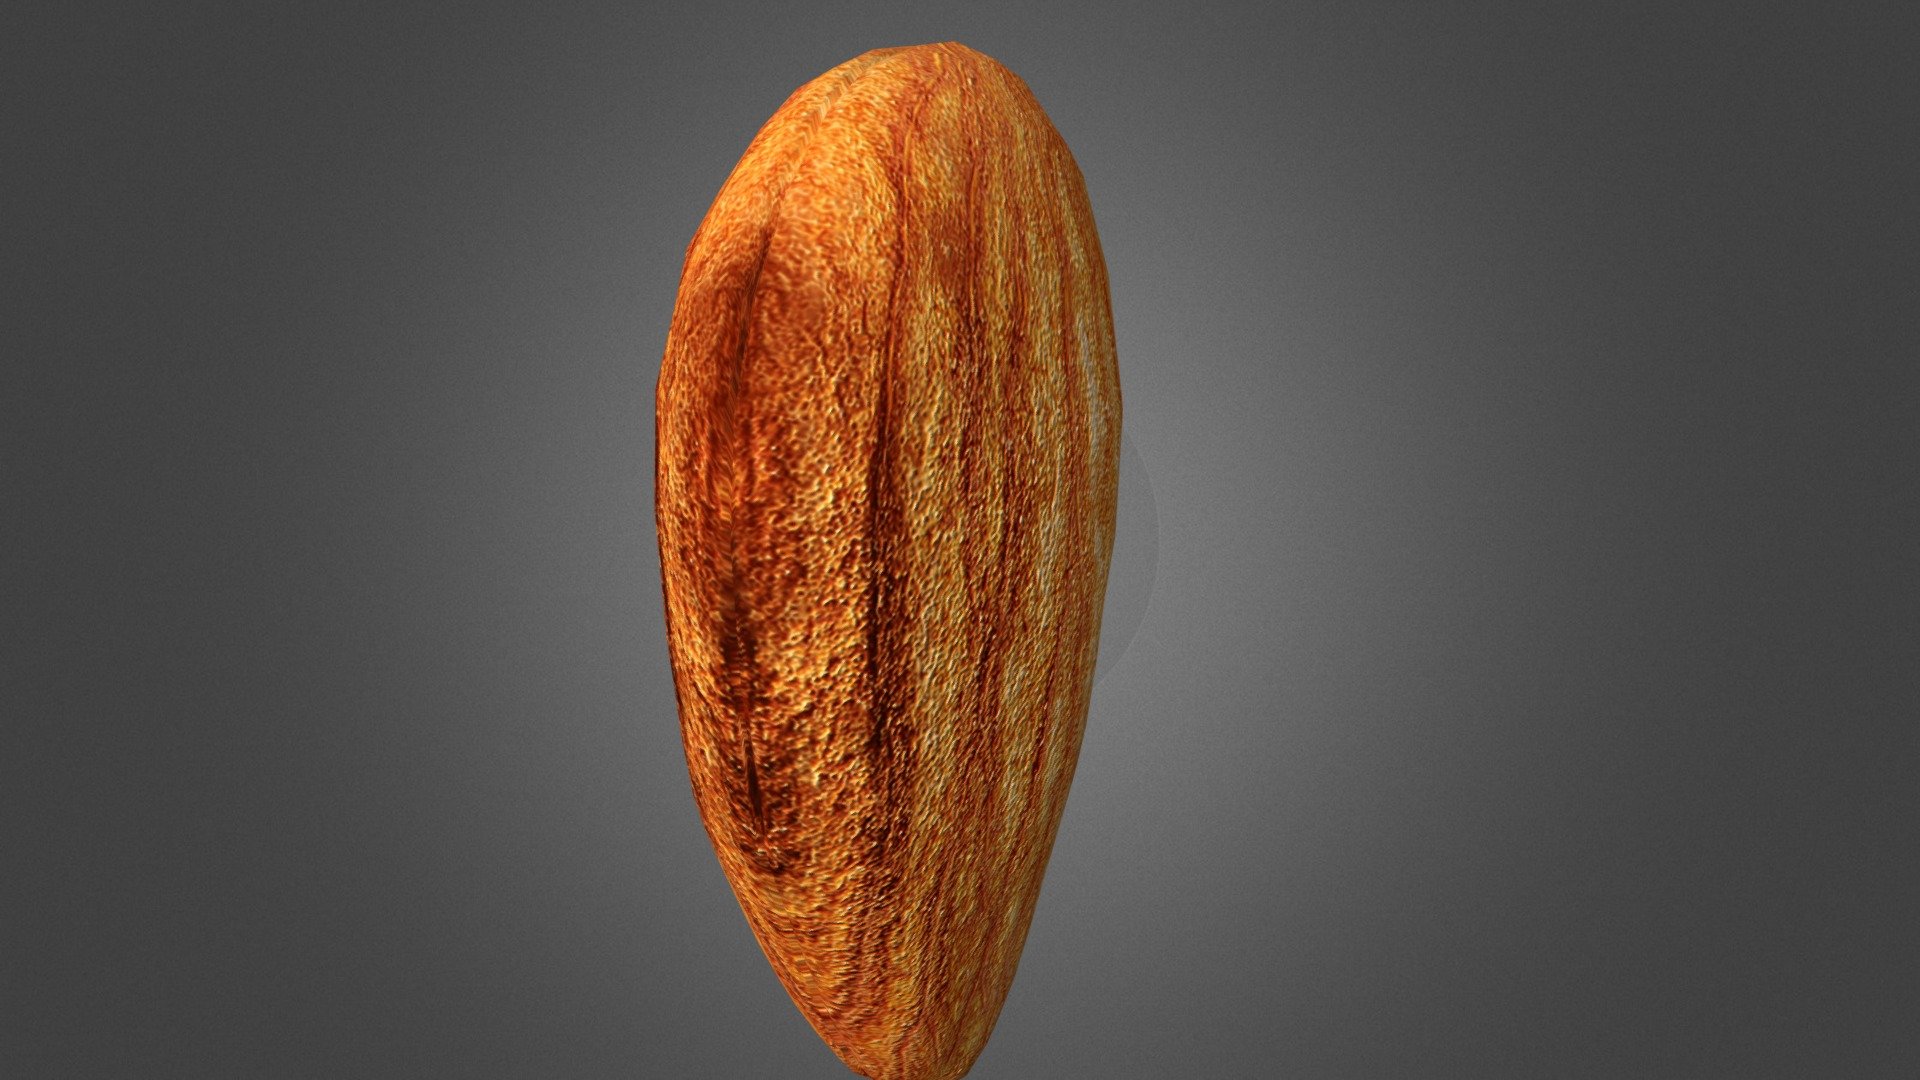 3d Almonds model with texture - Almonds - Download Free 3D model by adityajaiswal9968 3d model